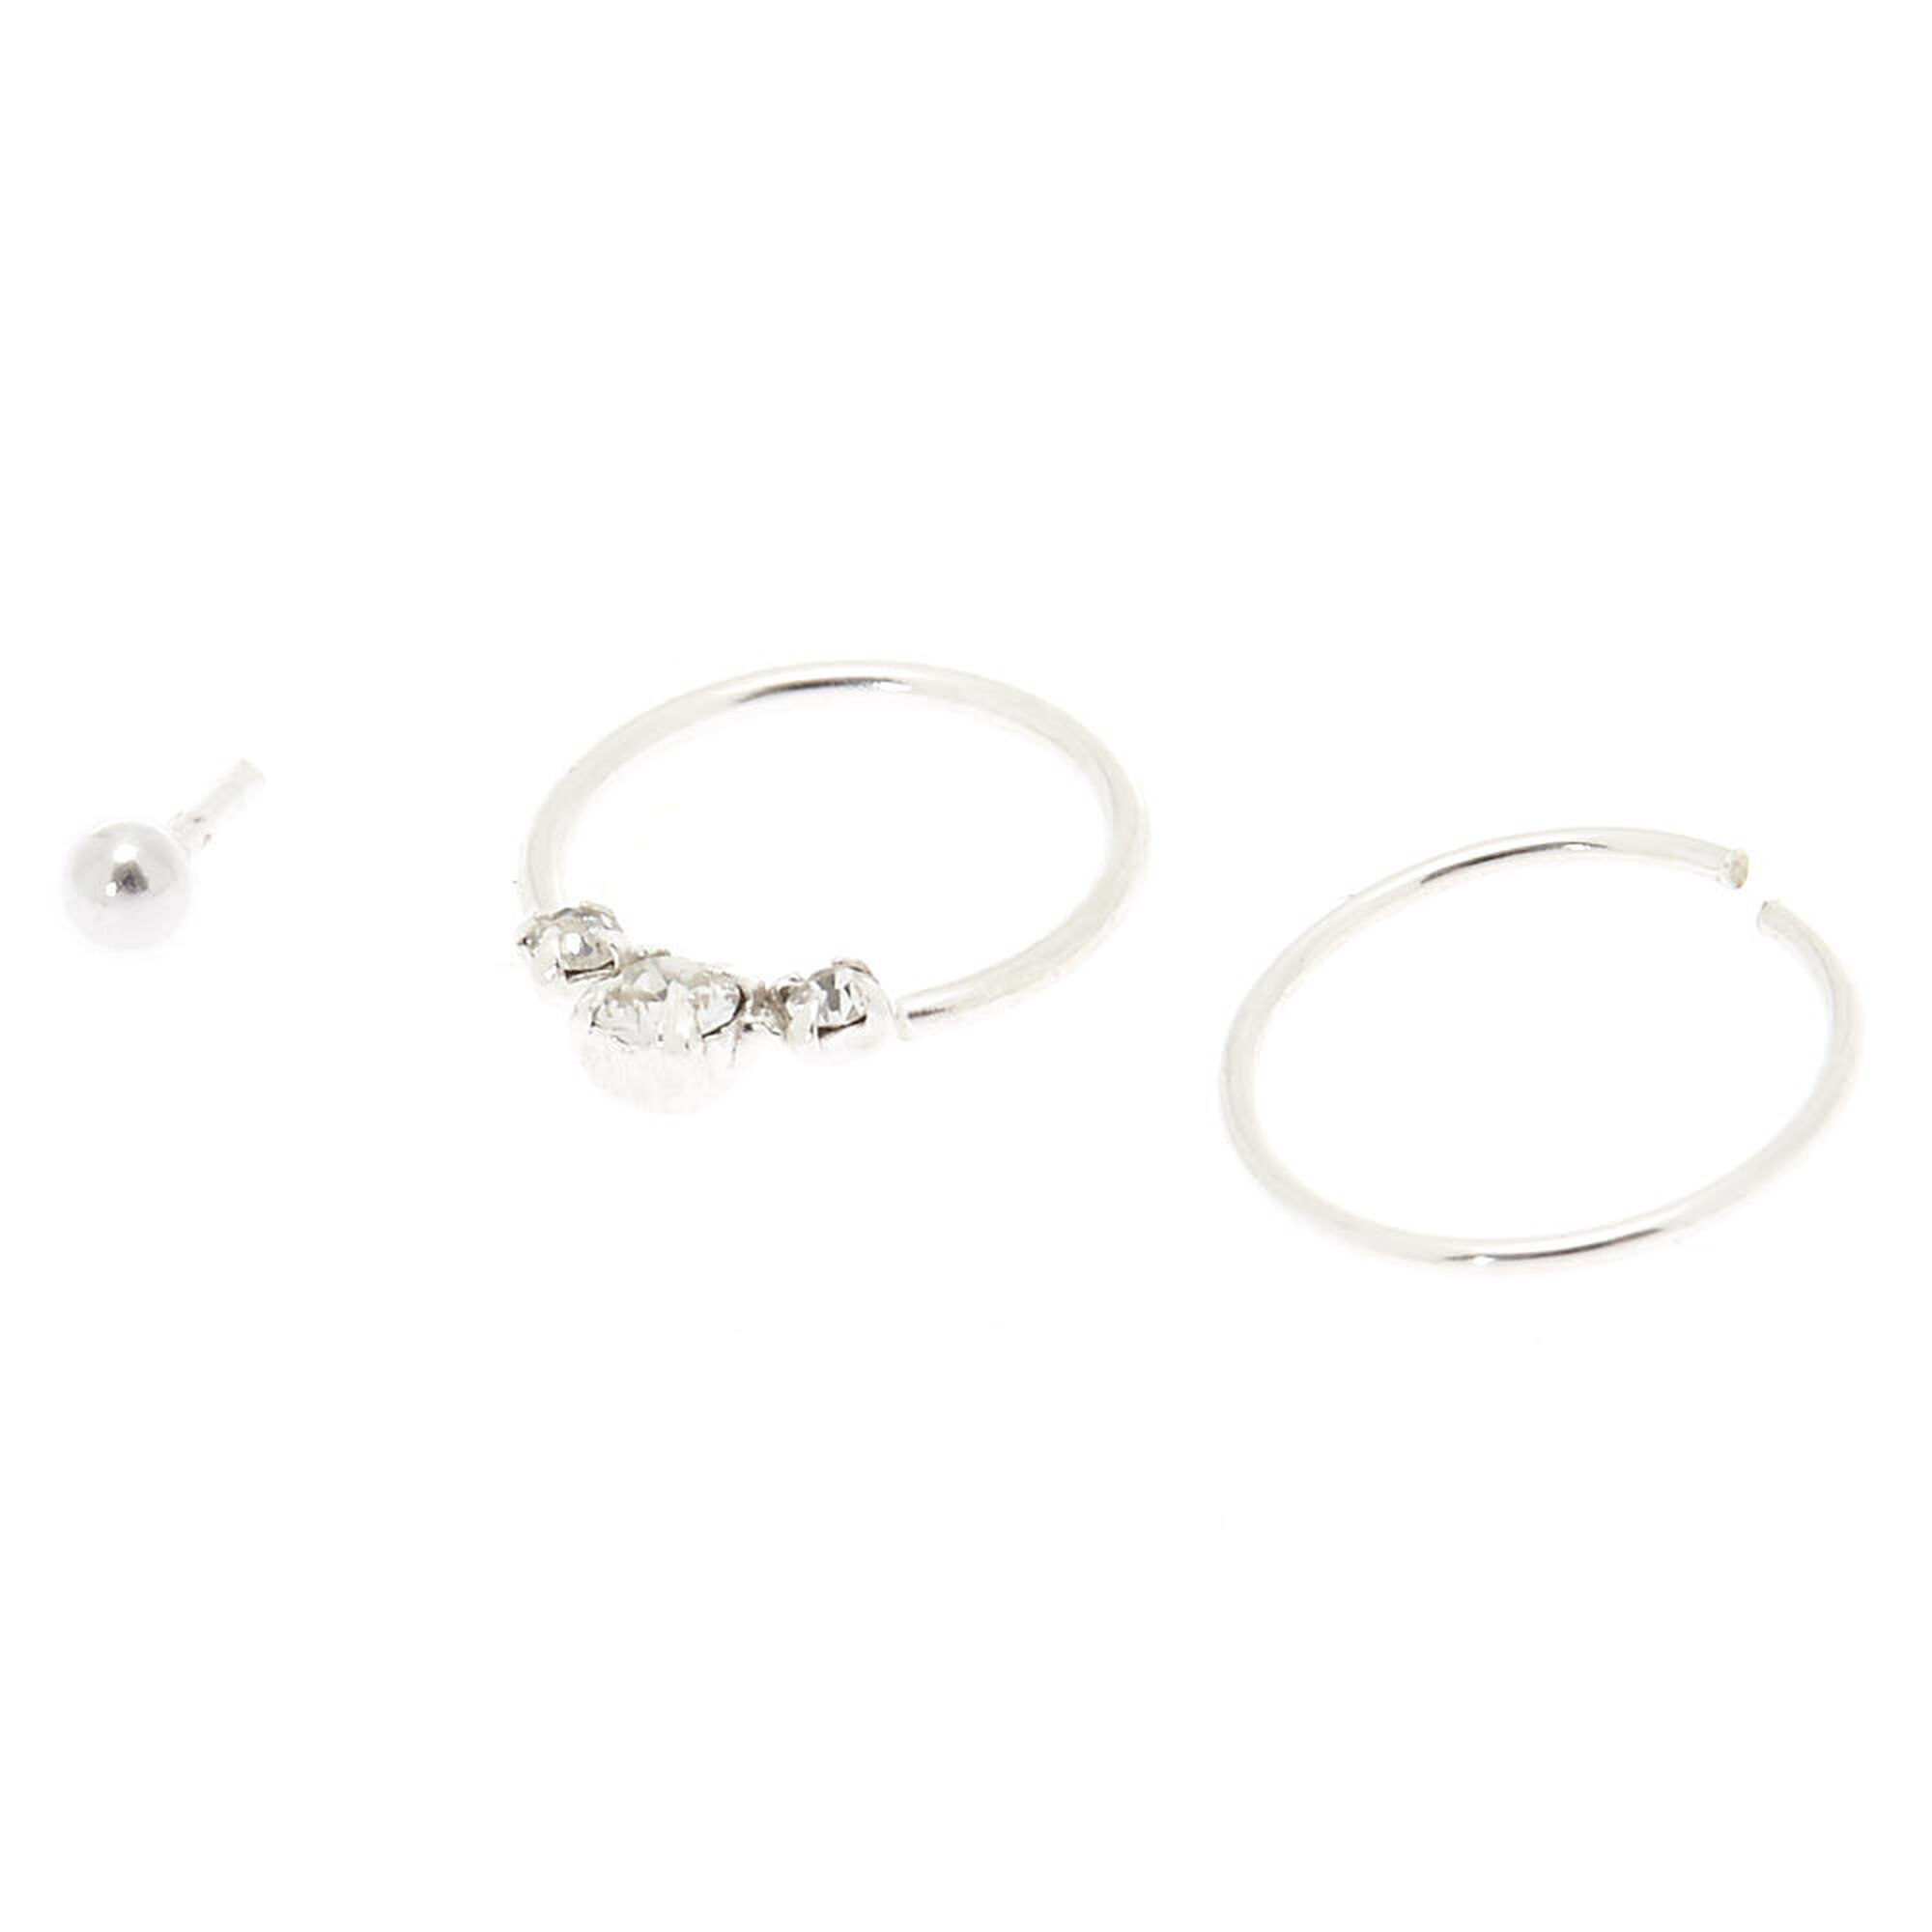 View Claires Tone Hoops Stud Cartilage Earrings 3 Pack Silver information